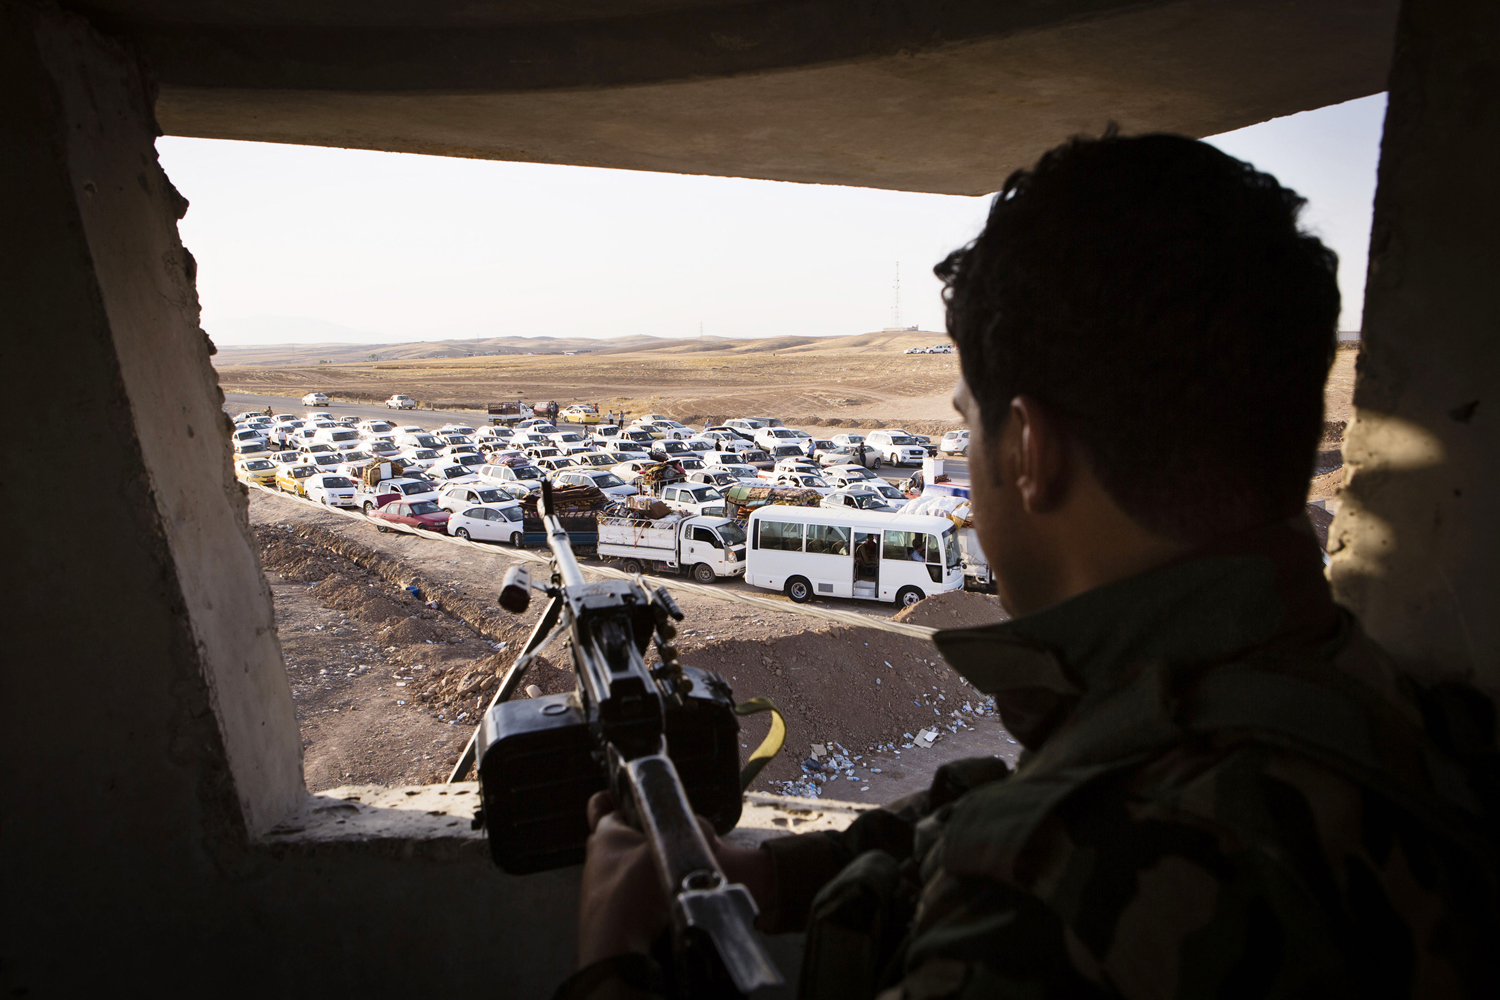 An Iraqi security forces member with his weapon takes position as people, who fled from the violence in Mosul, arrive in their vehicles at a camp for internally displaced people on the outskirts of Erbil in Iraq's Kurdistan region June 14.